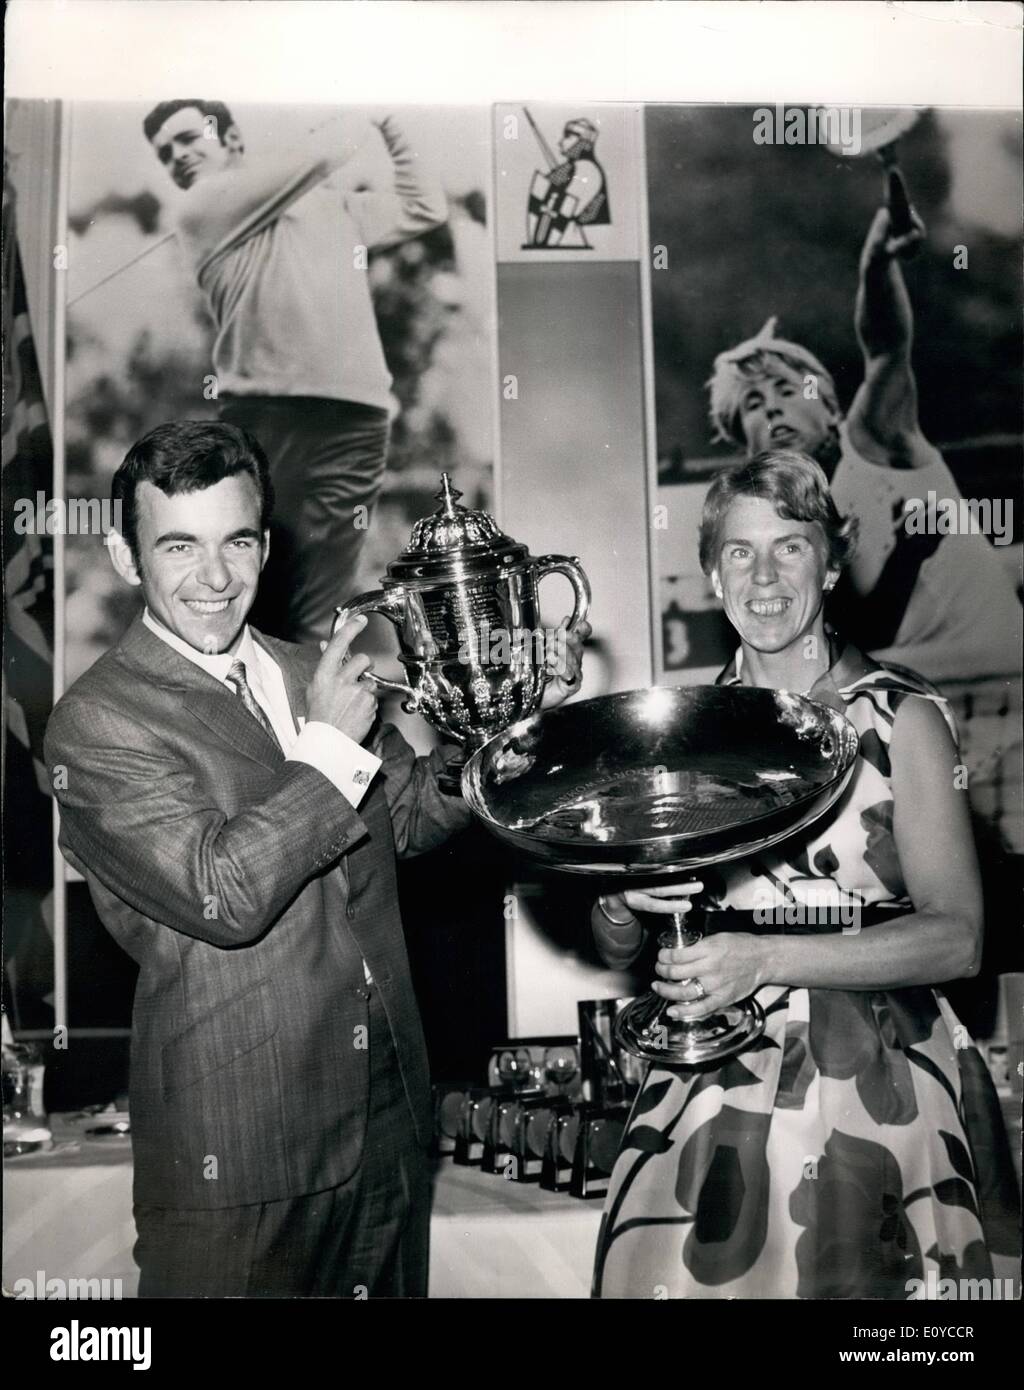 Nov. 11, 1969 - Sportsmen Of The Year Lunch: British Open Golf Champion, Tony Jacklin and Ann Jones, Wimbledon Champion- named as Sportsman and Sportswoman of the year - today received their awards from the Prime Minister, at the Daily Express Sportsman of the Year lunch at the Savoy Hotel. Picture Shows: Tony Jacklin and Ann Jones pictured with their awards at the Savoy hotel today. Stock Photo